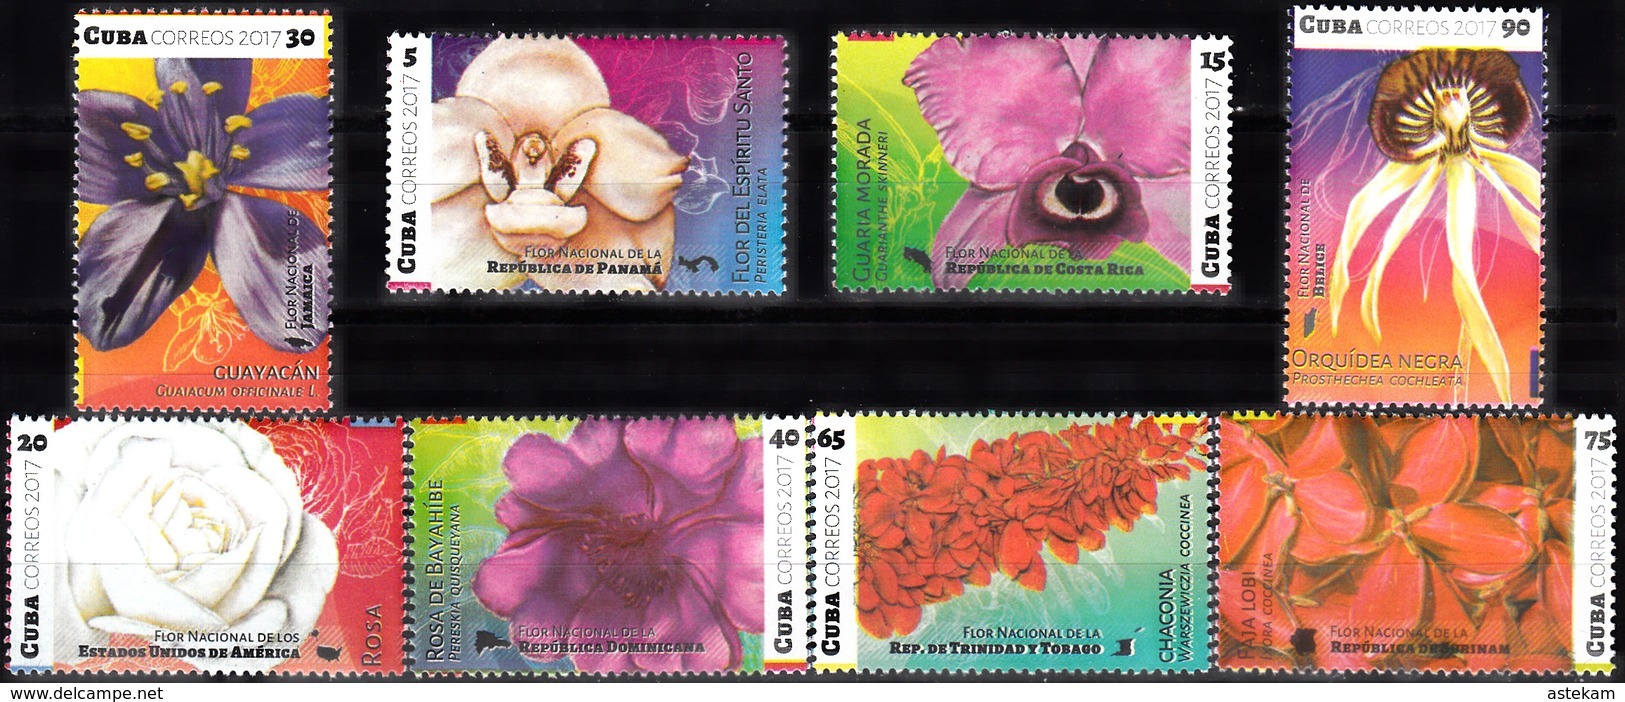 CUBA 2017, FLORA, FLOWERS From The CARIBBEAN, COMPLETE, MNH SET, GOOD QUALITY, *** - Ungebraucht